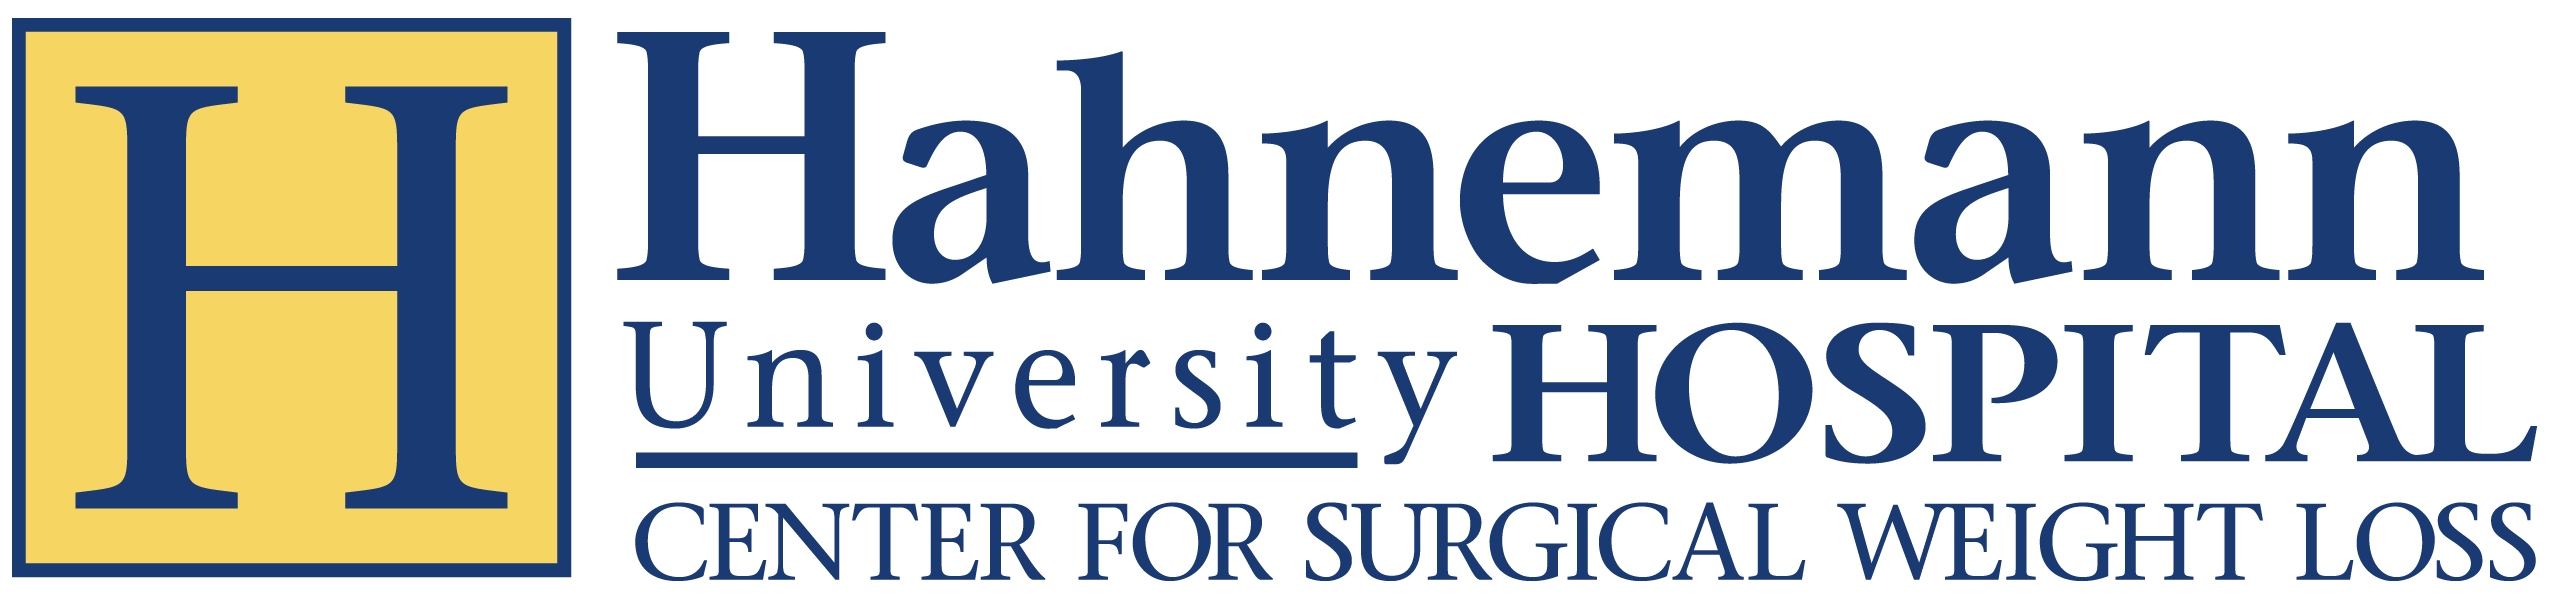 Center for Surgical Weight Loss at Hahnemann University Hospital